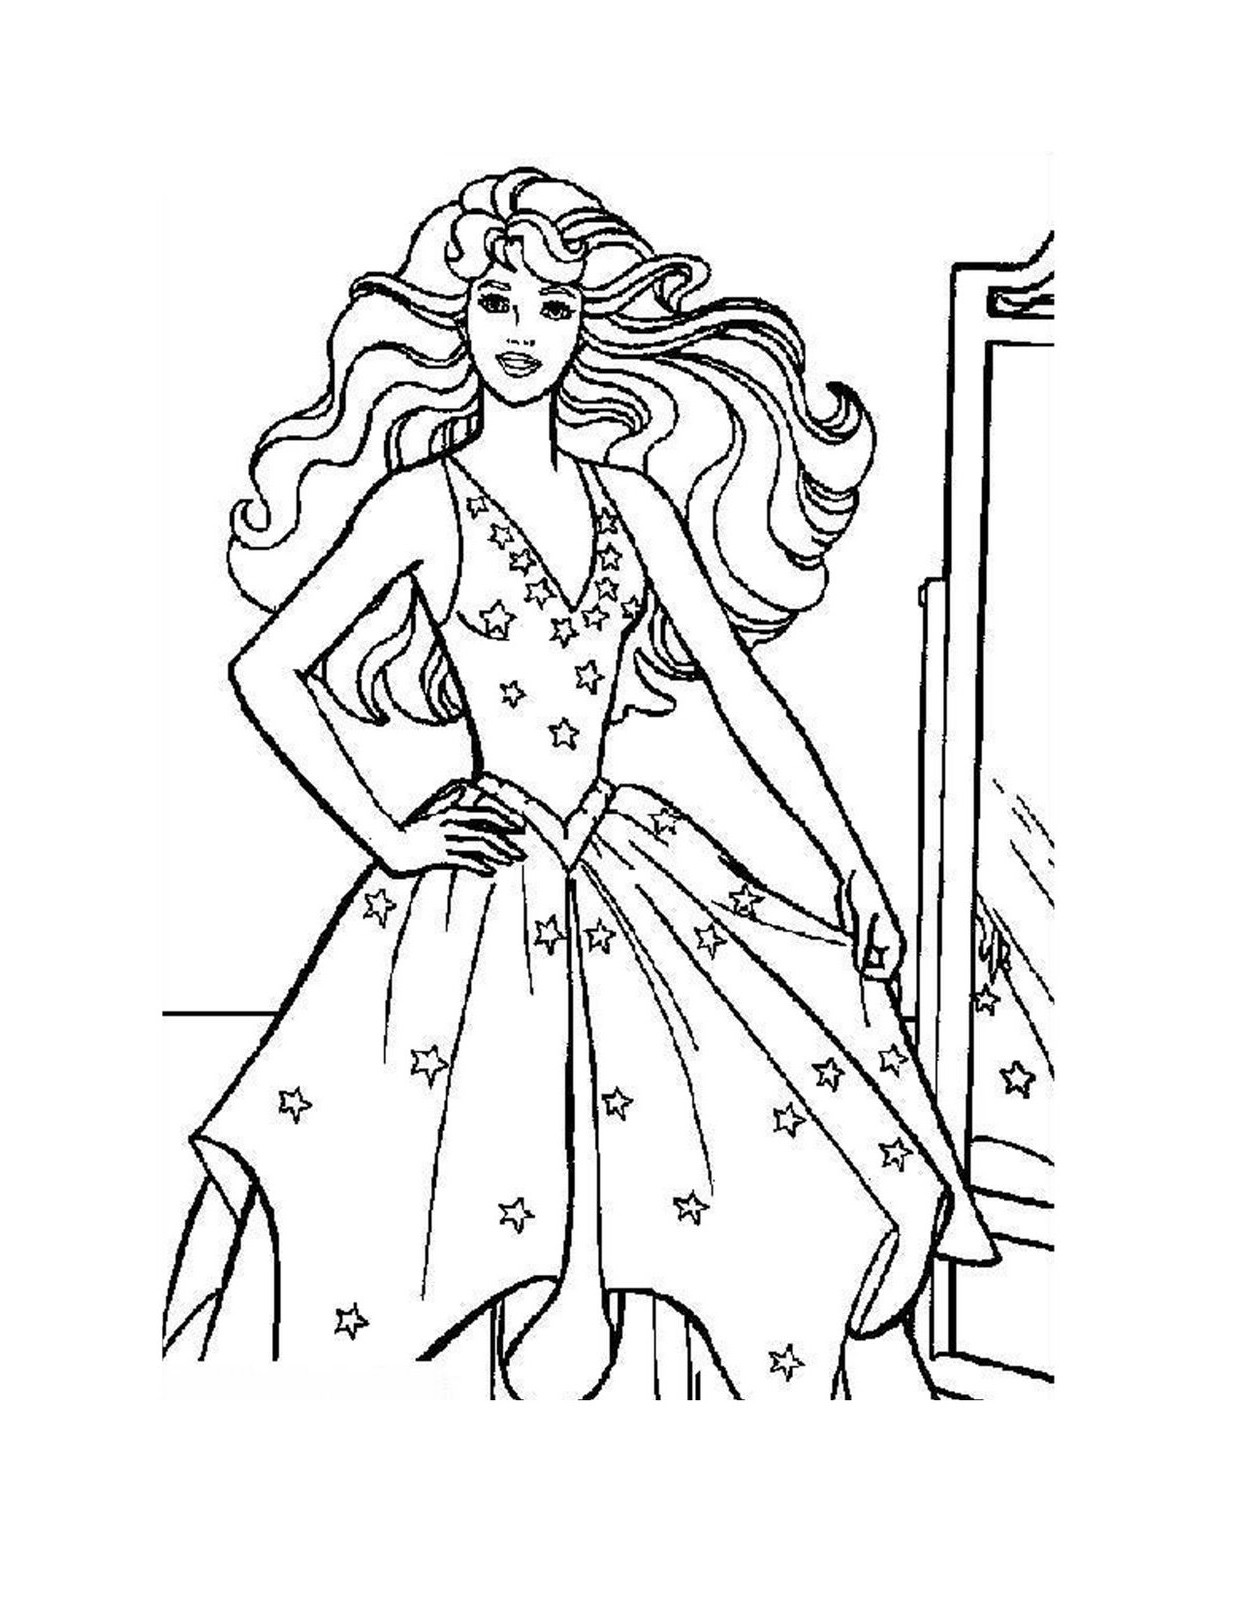 Coloring Pages For Kids Princesses
 Princess Outline Drawing at GetDrawings